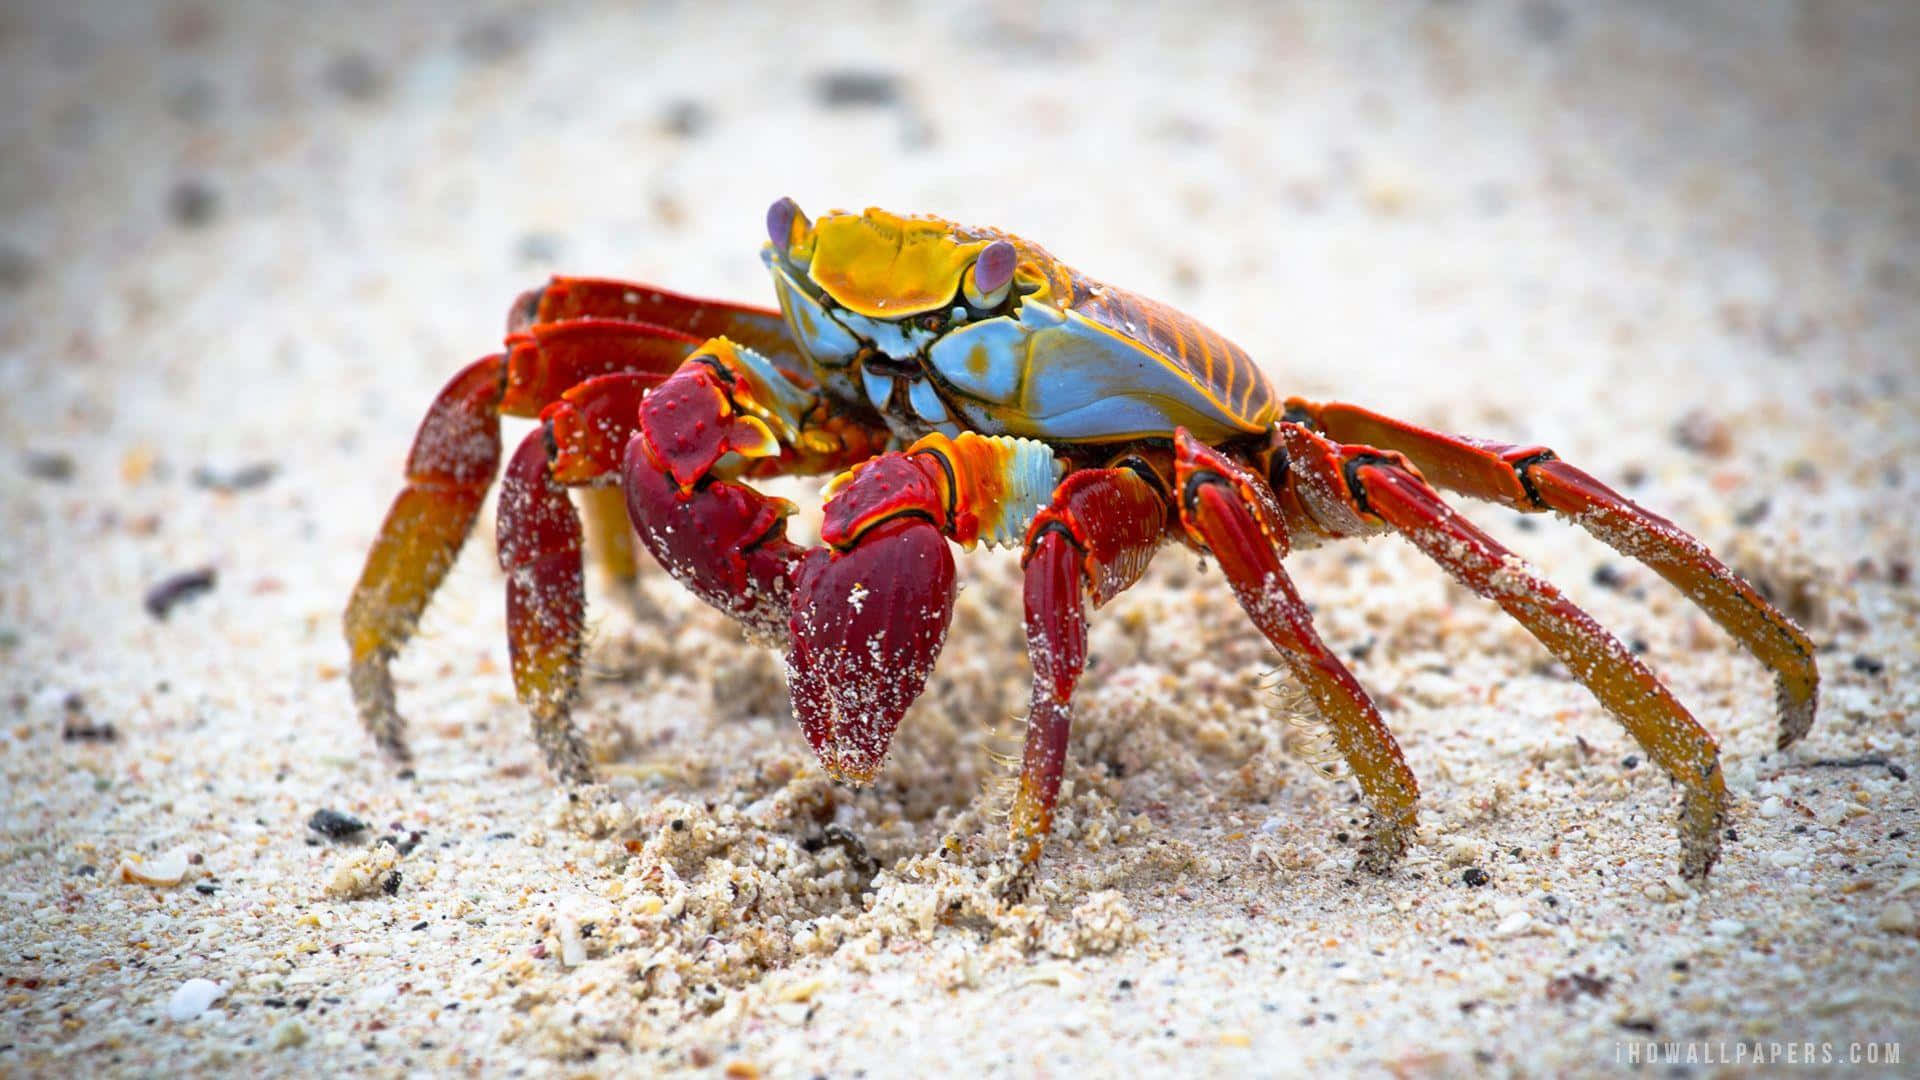 A Vibrant Marine Snapshot Featuring A Colorful Crab